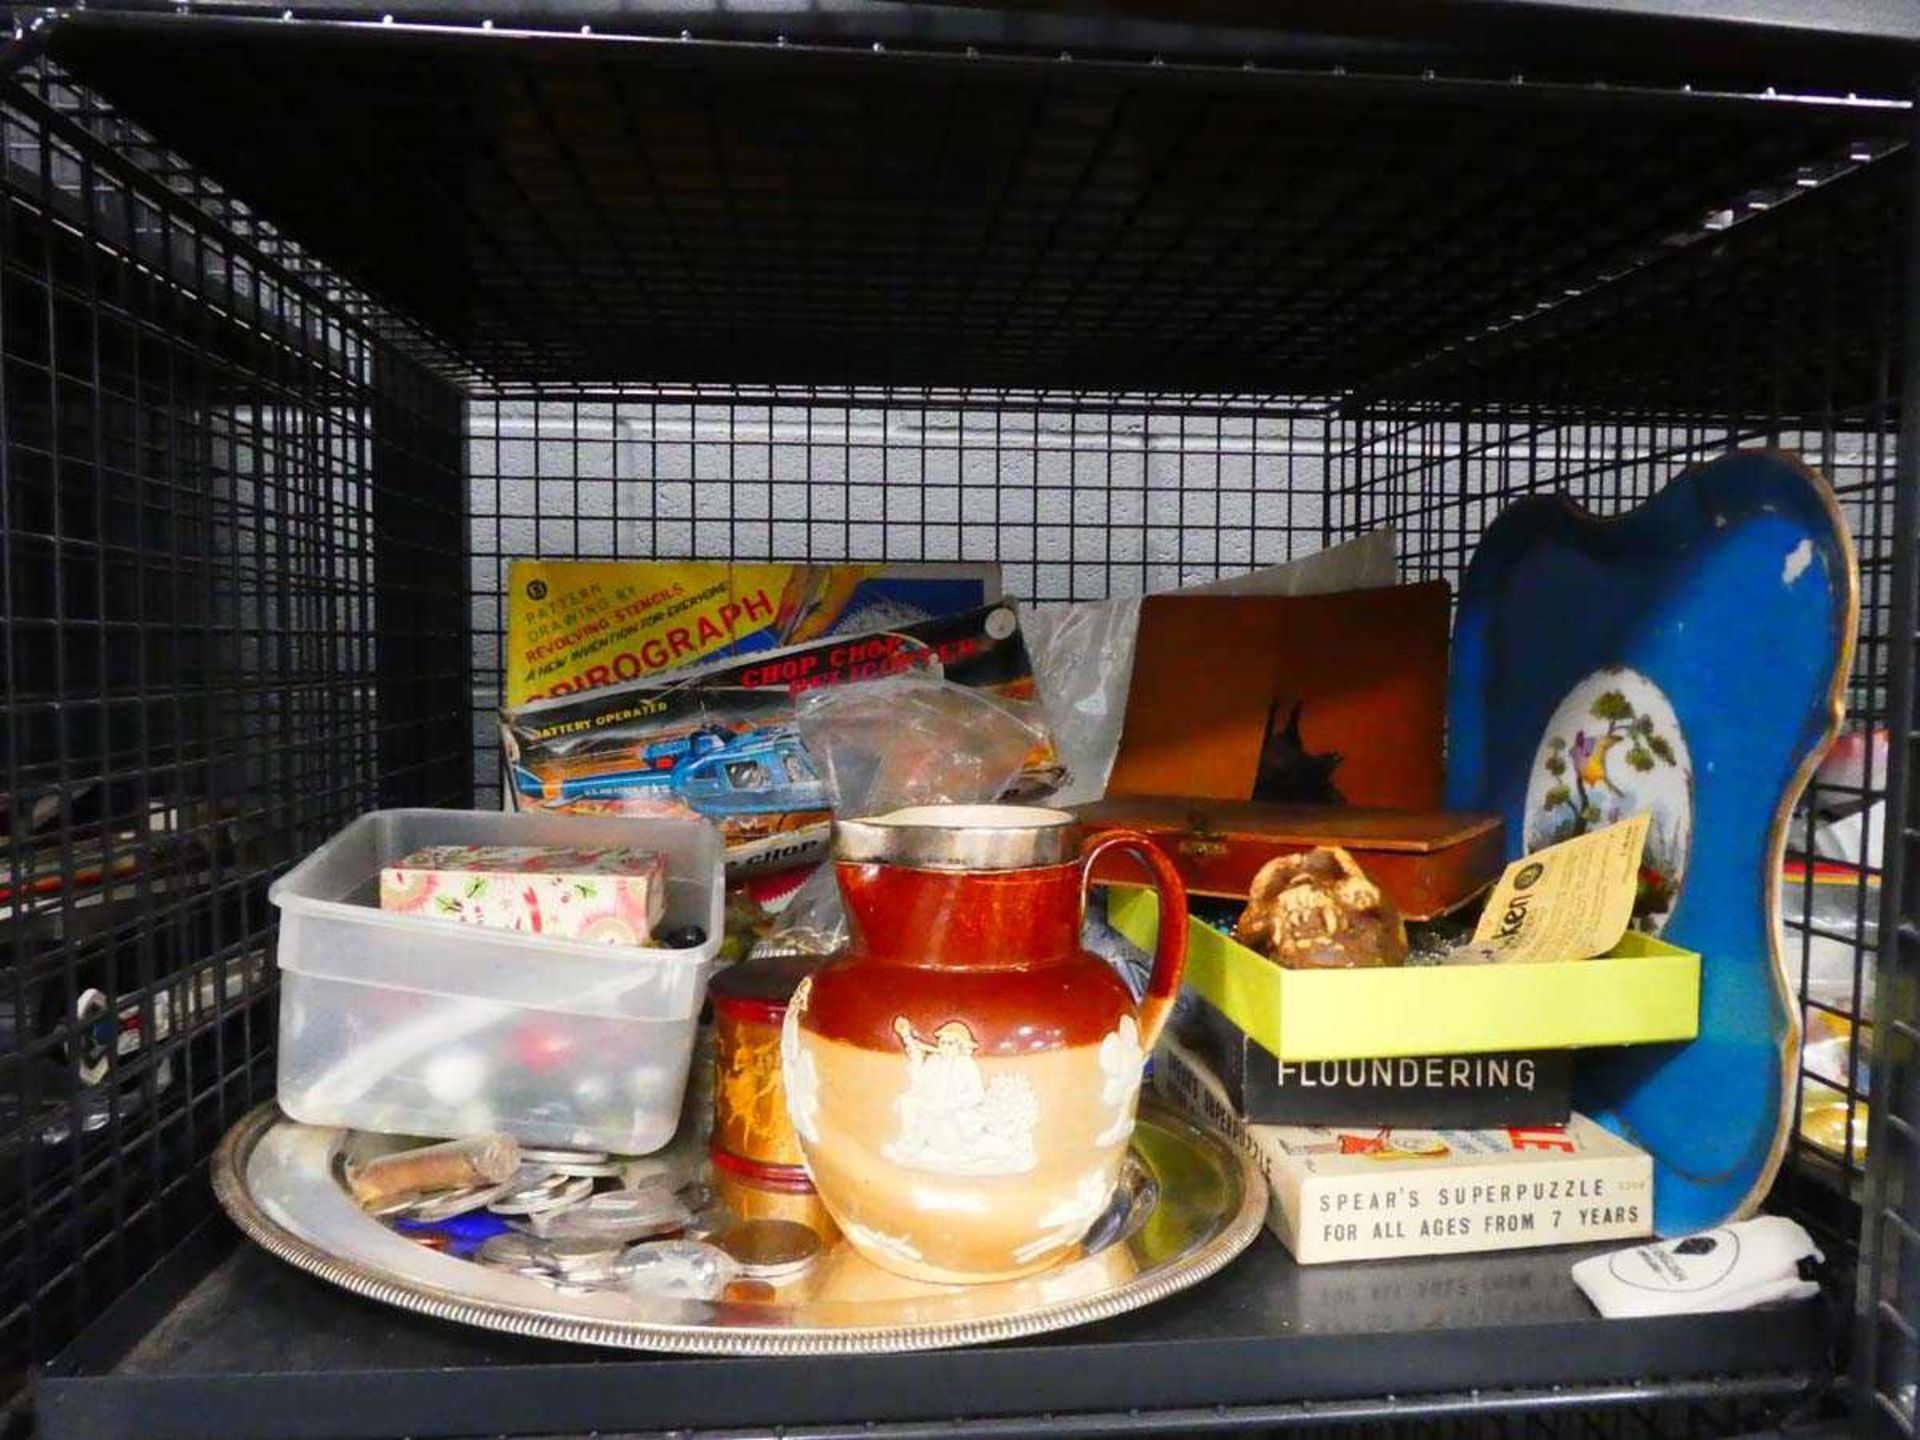 Cage containing harvest jug, coinage, marbles, children's toys and dress jewellery